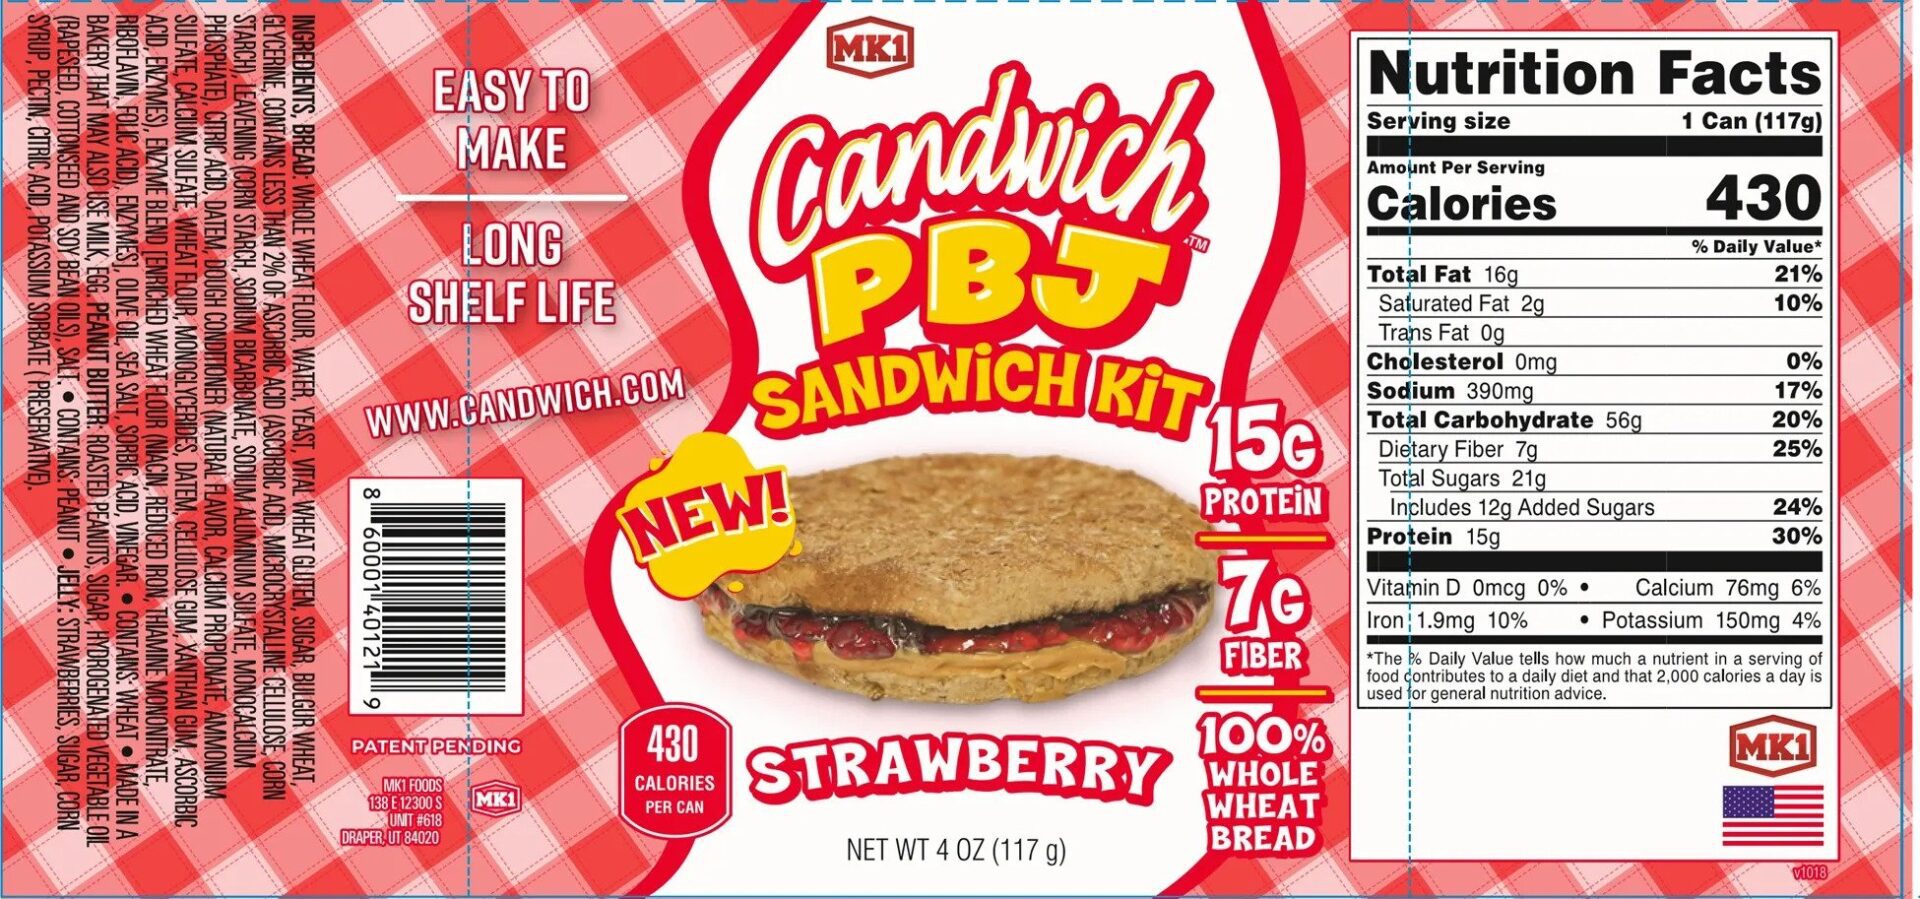 A sandwich kit with a strawberry flavor.